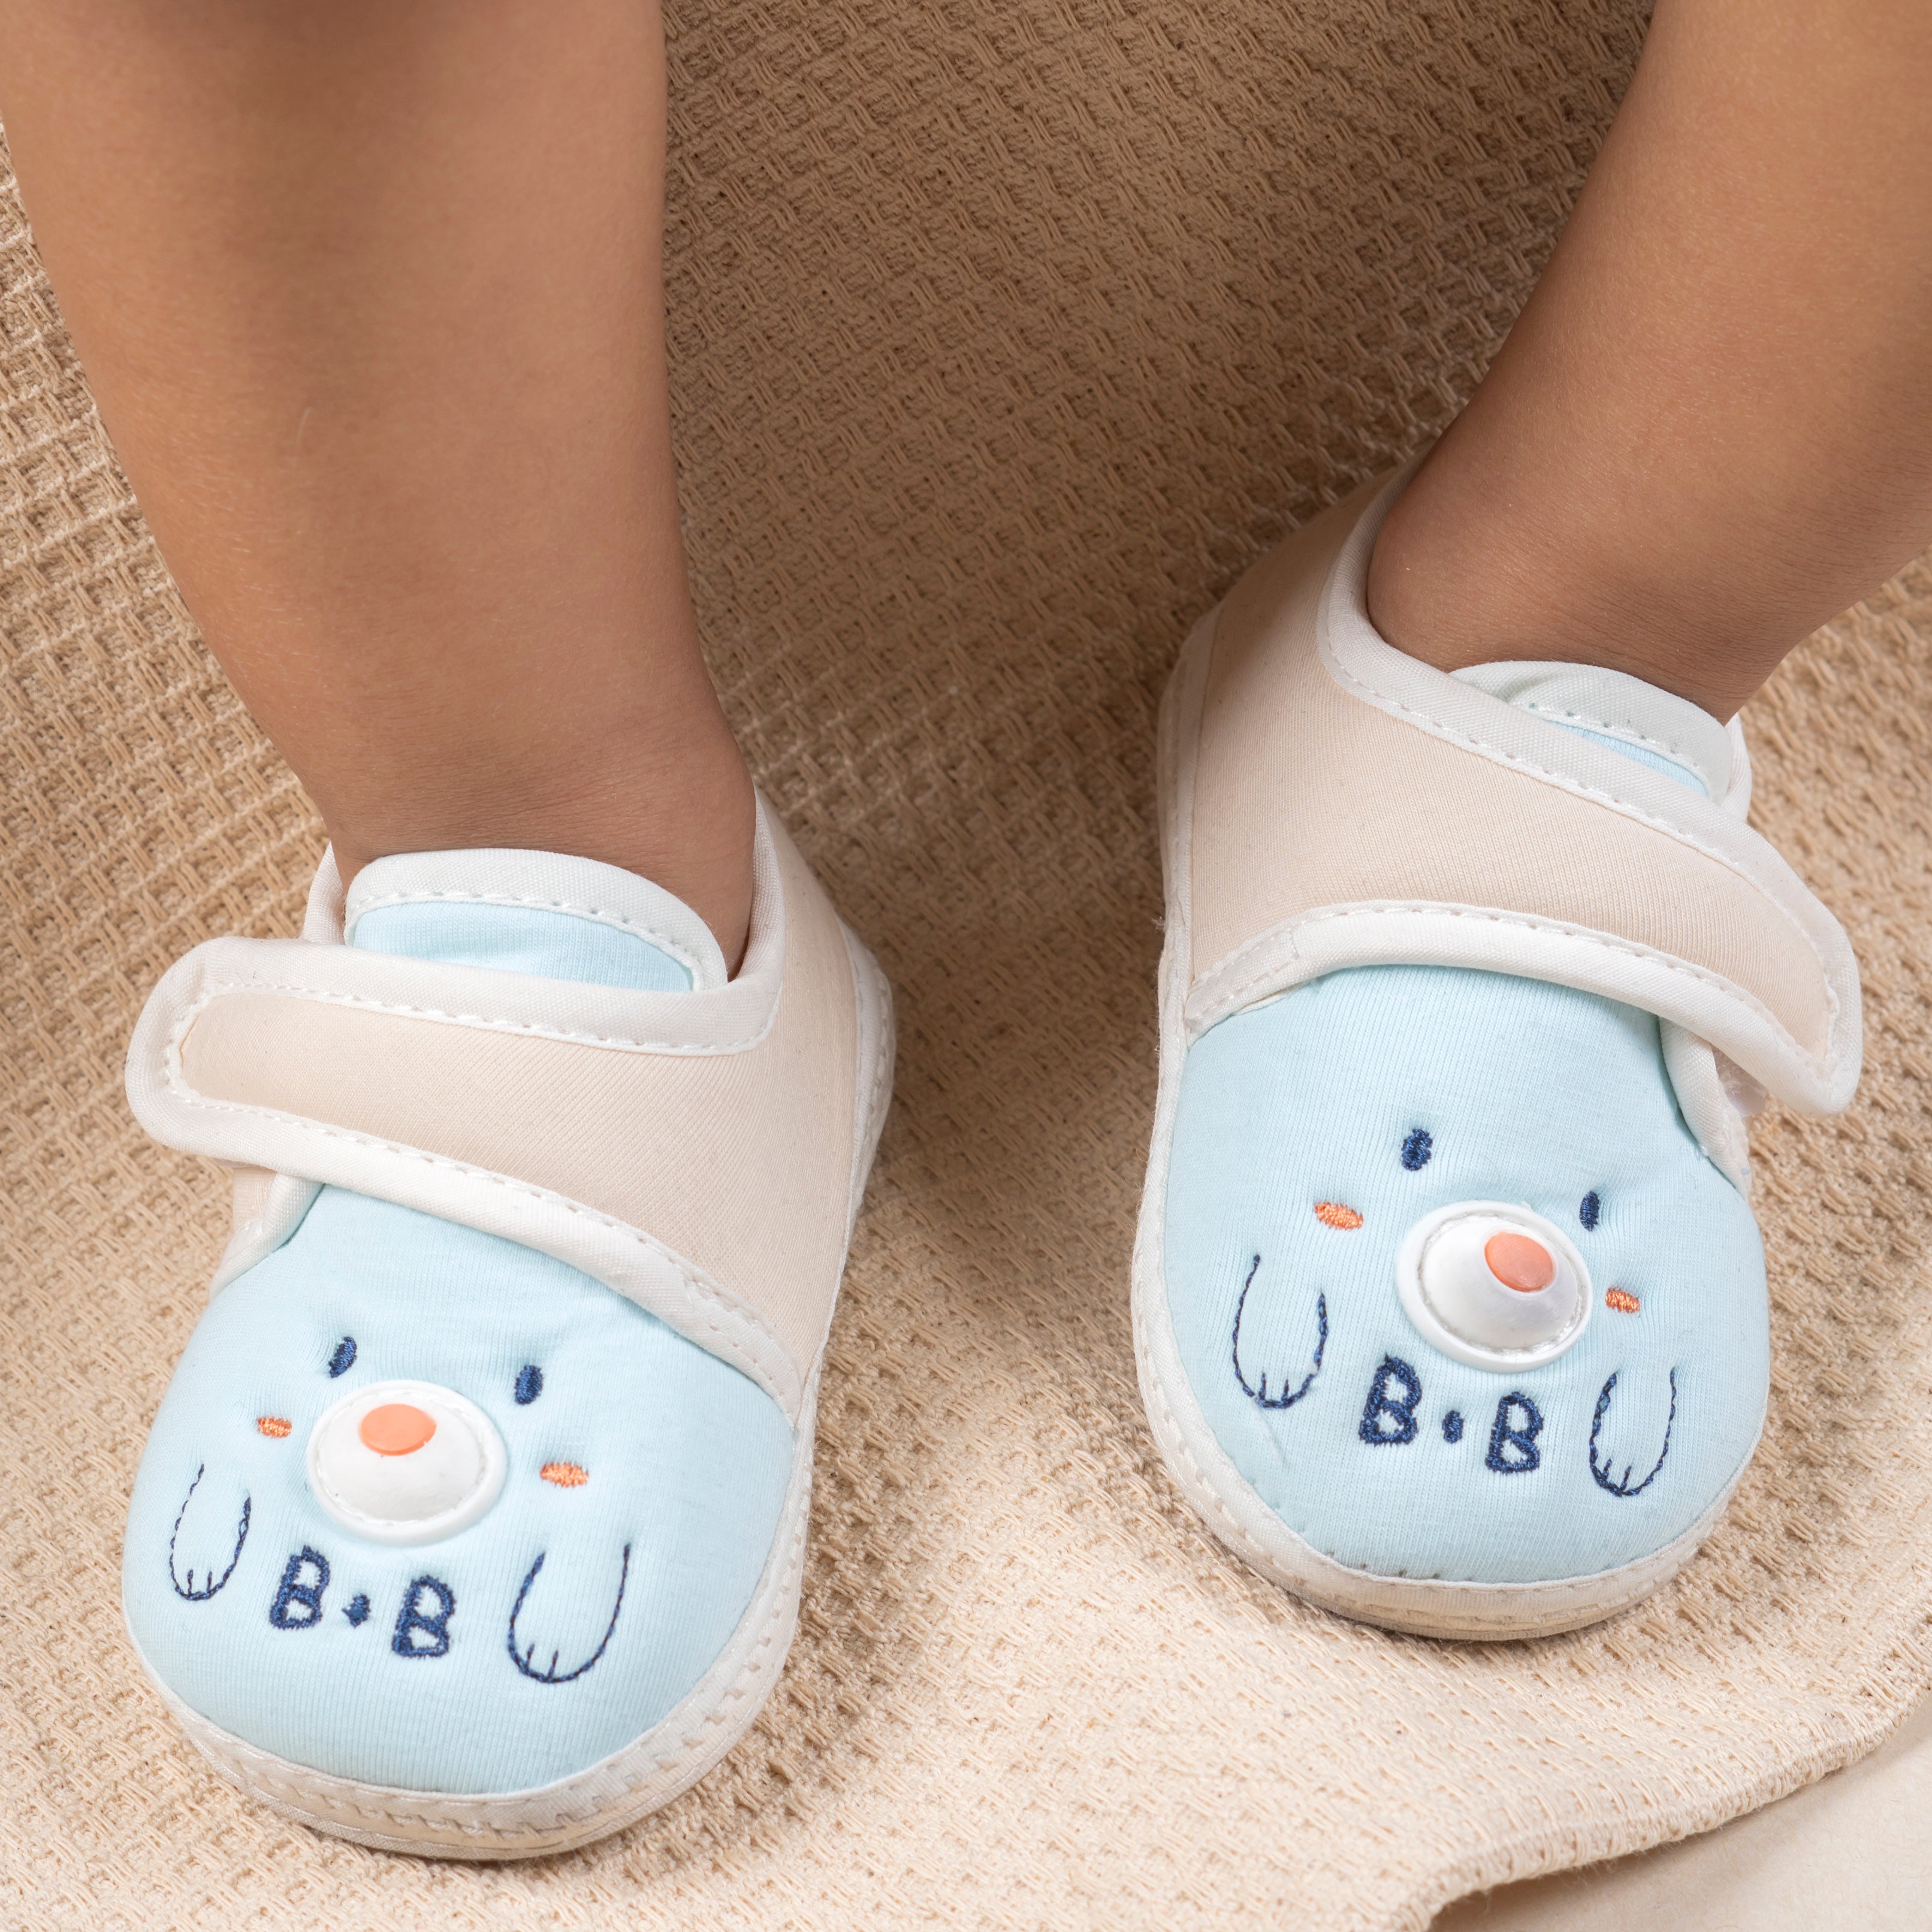 Baby Moo Smiling Bear Soft Sole Anti-Slip Booties - Blue